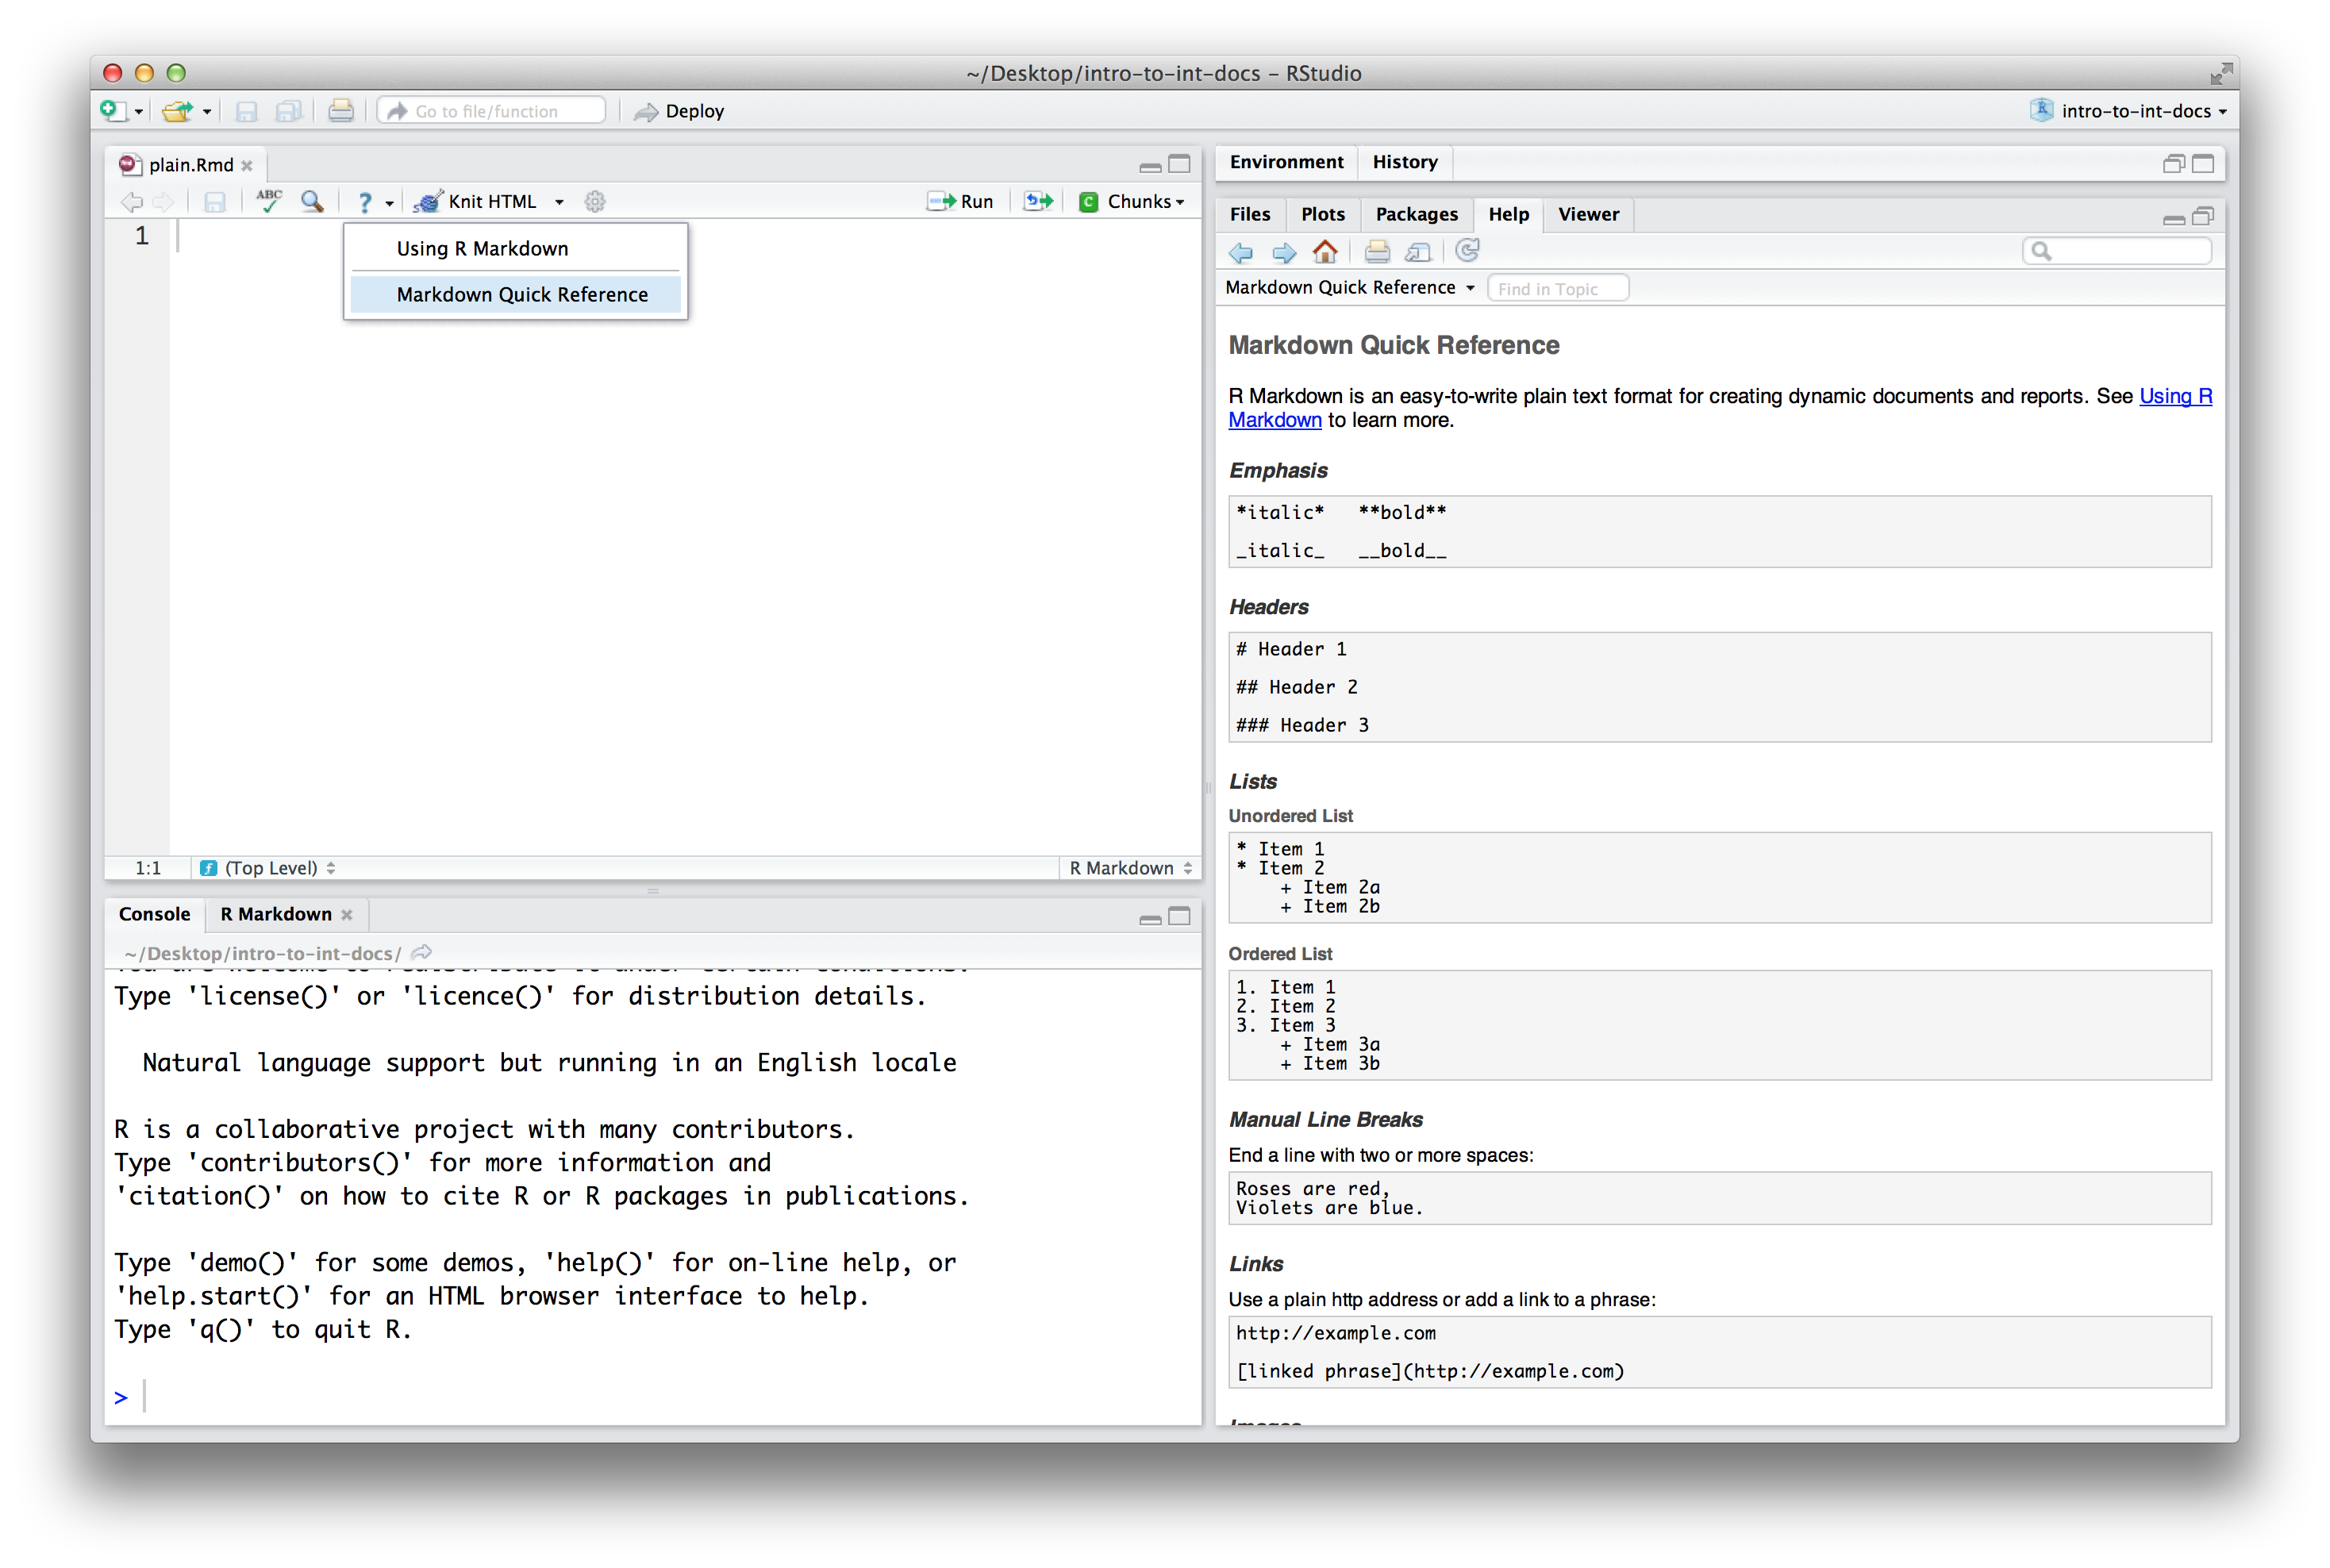 Markdown Quick Reference guide opened in the right panel of the RStudio IDE.